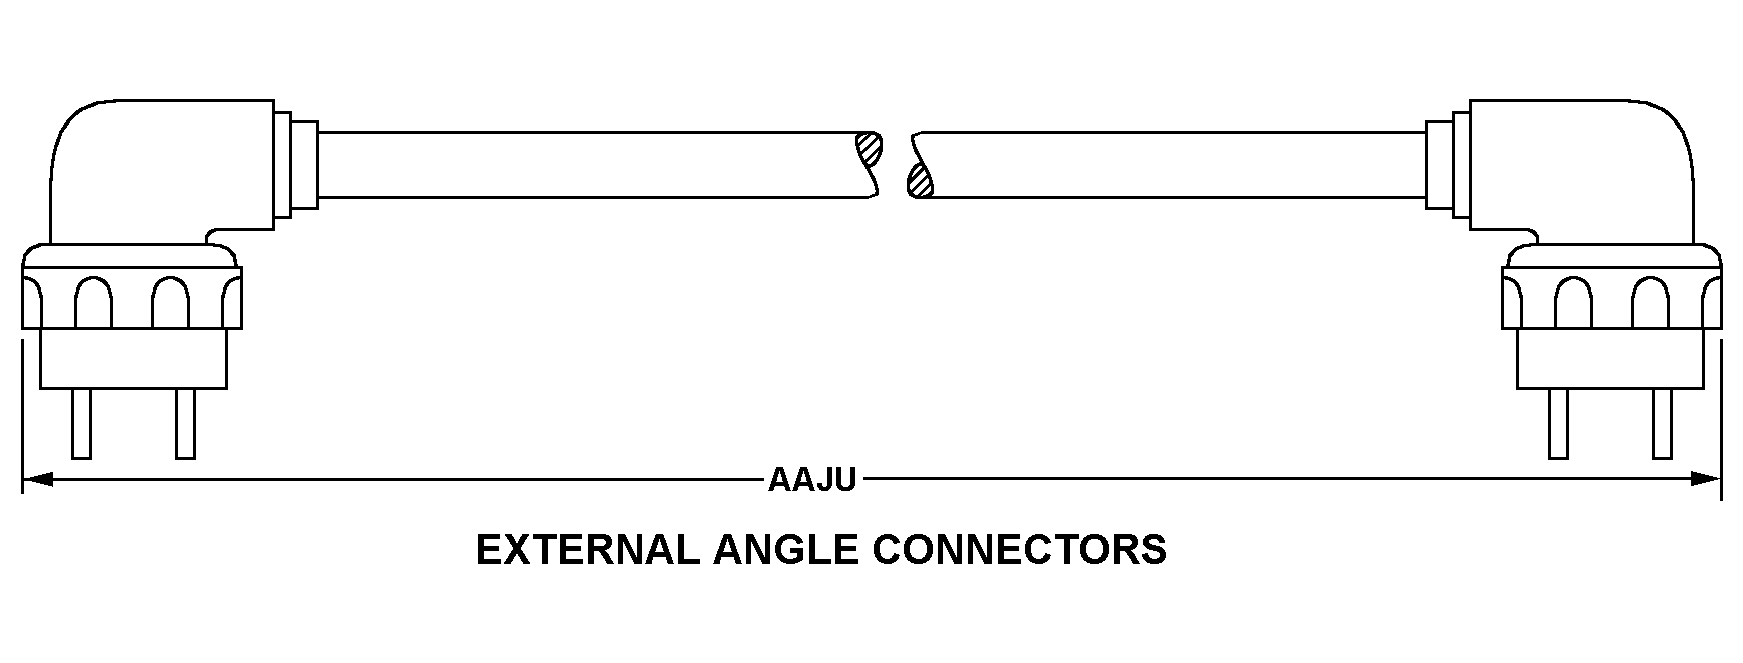 EXTERNAL ANGLE CONNECTORS style nsn 5995-01-479-1217